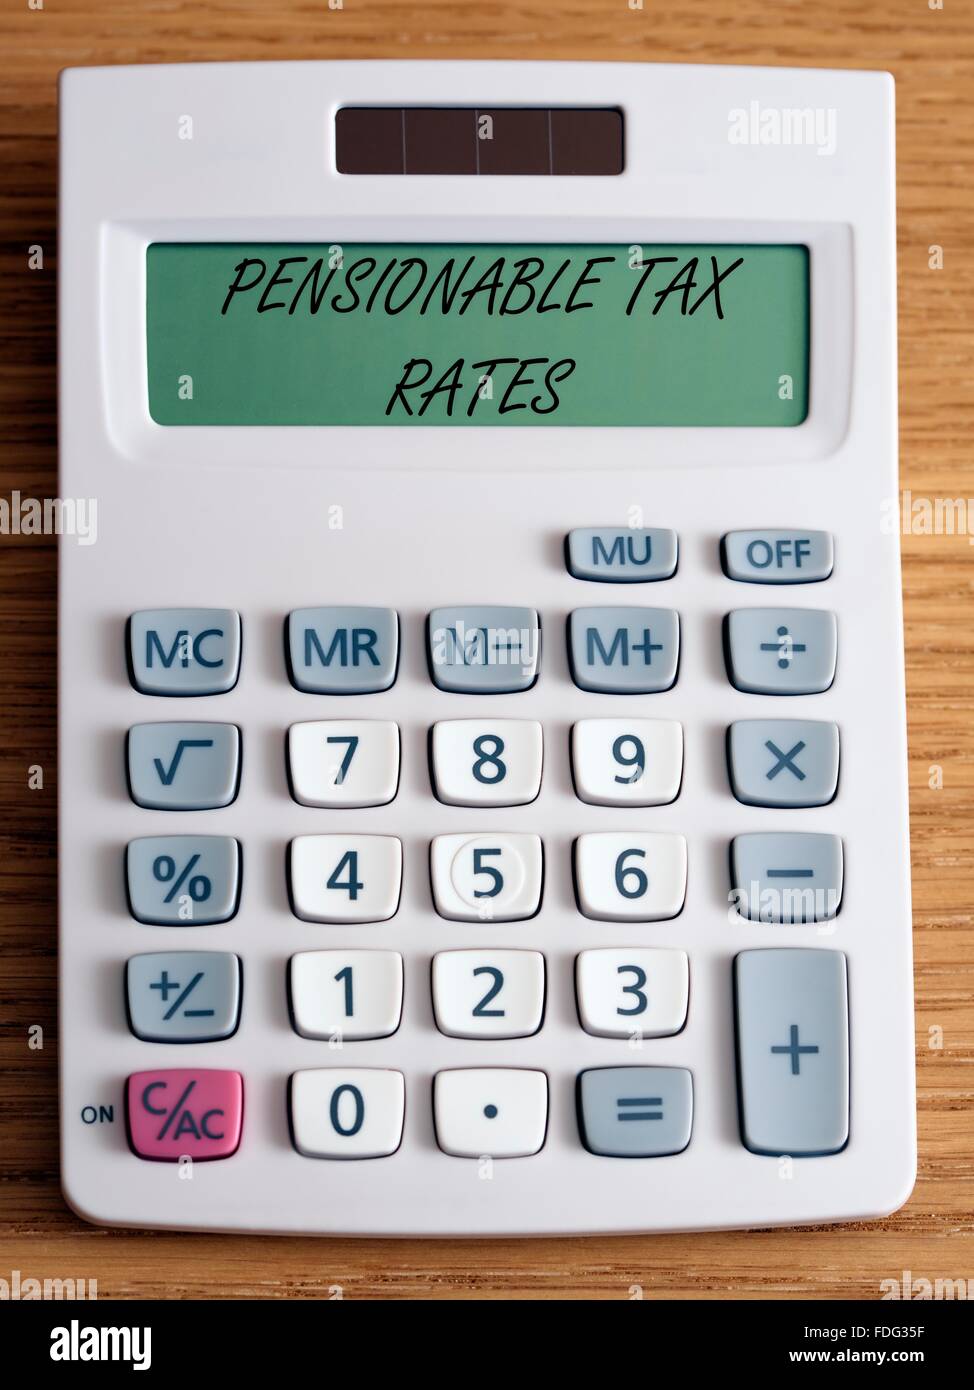 Pensionable tax rates on a calculator screen. Stock Photo